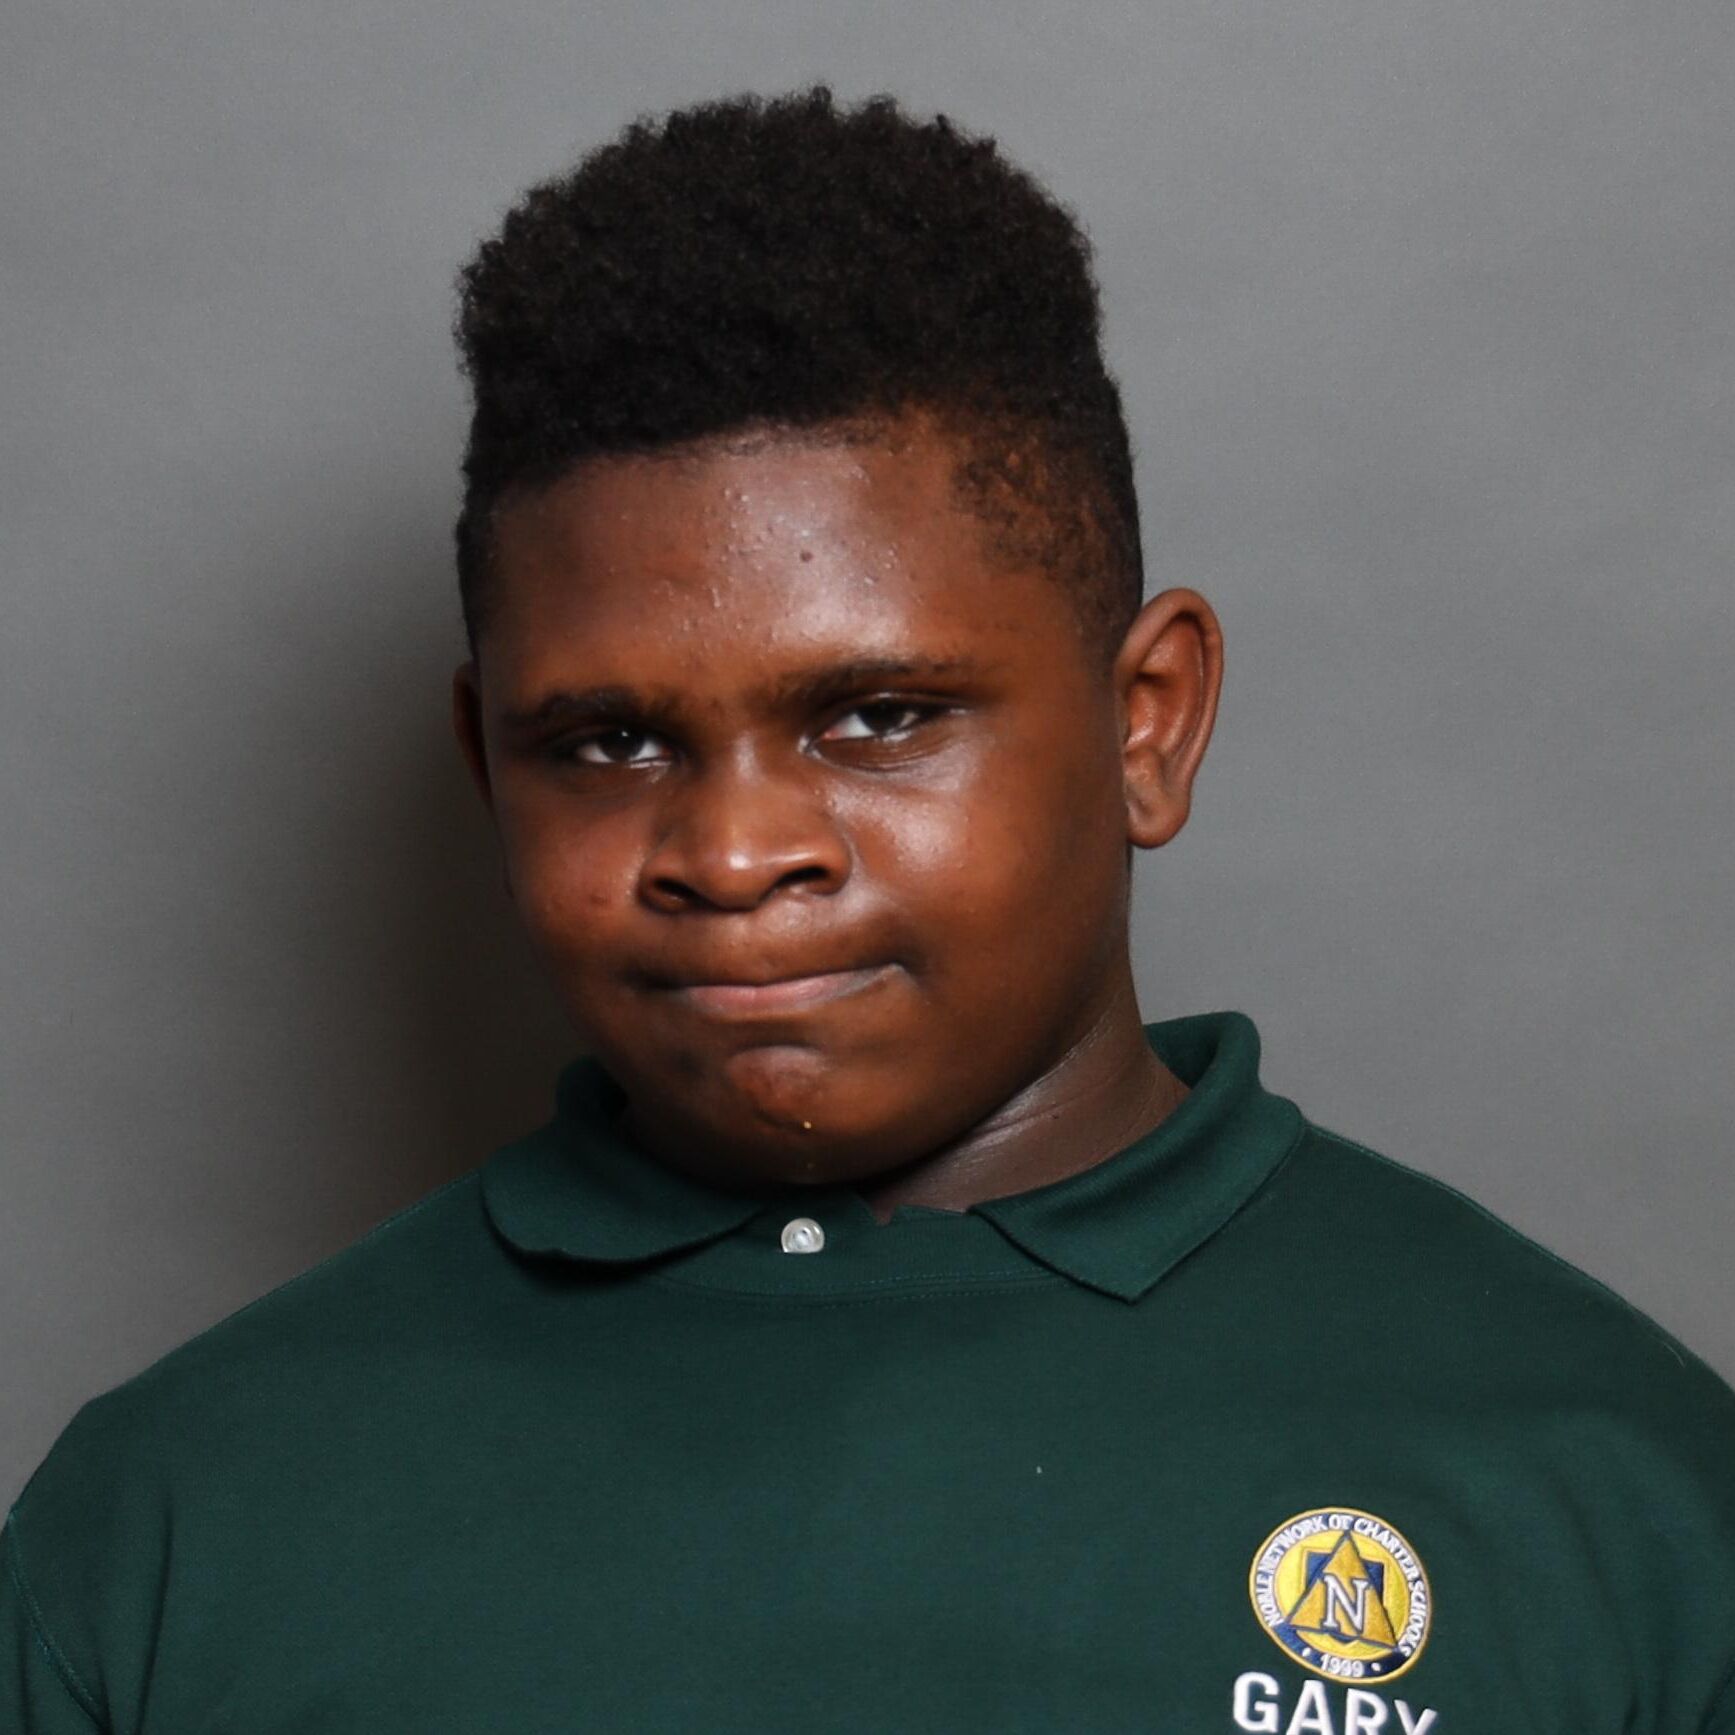 This photo shows a headshot of Dawson Harris, an 8th grader at Gary Comer Middle School in Chicago, IL. Dawson is a young Black boy with short dark brown hair, cut in a hi-top fade hairstyle. He is wearing a dark green shirt with the Gary Comer Middle School logo on it.